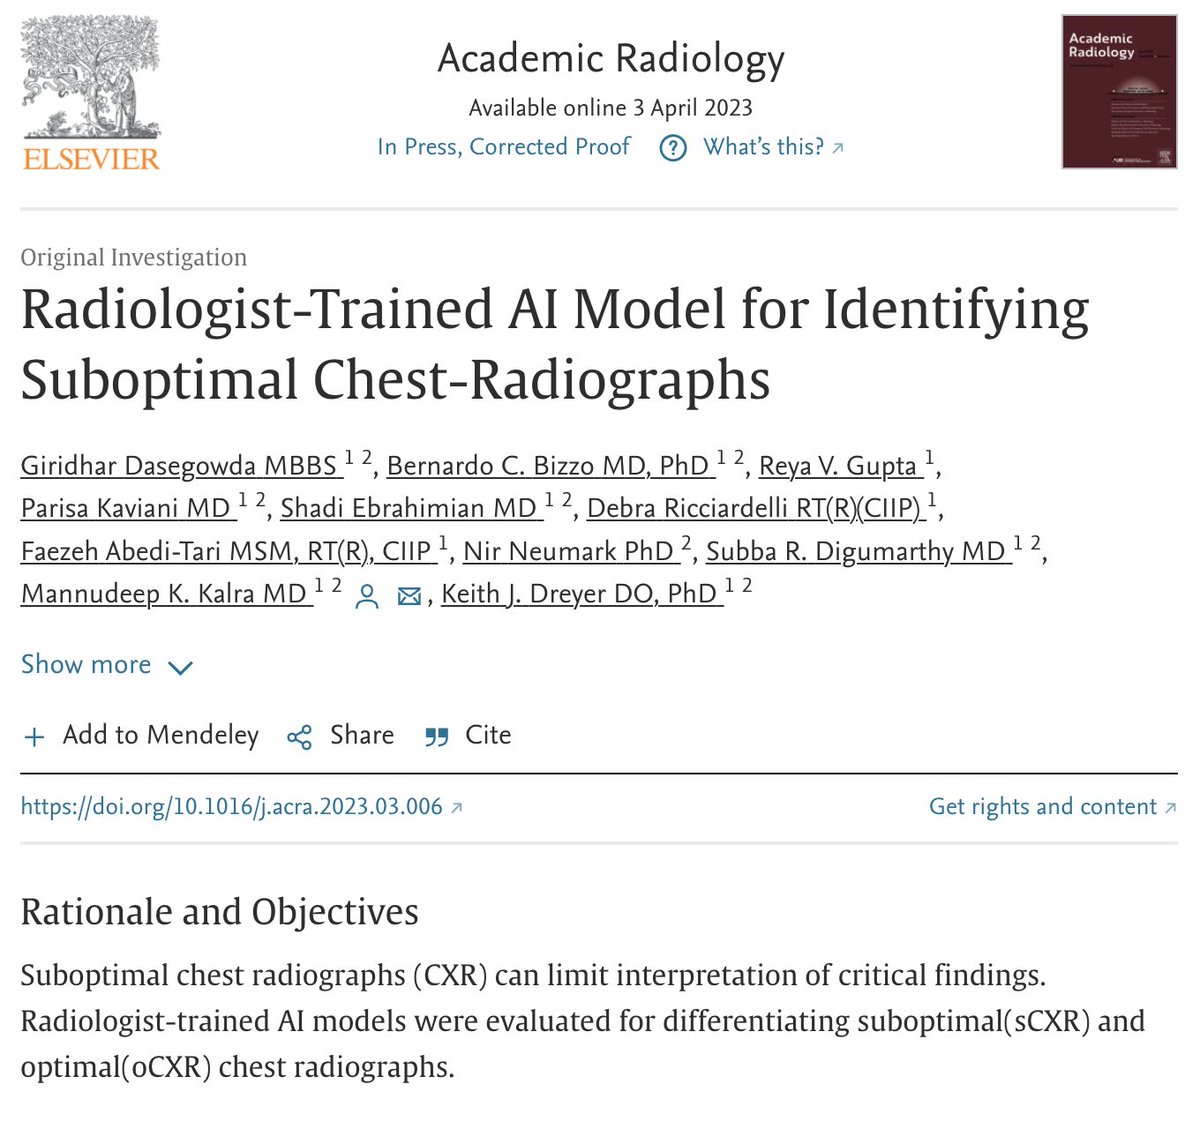 Congratulations to the @MassGenBrigham team for their recent publication in Academic Radiology! @BernardoBizzo Click here to learn more: lnkd.in/ejgTrDPQ #ArtificialIntelligence #MachineLearning